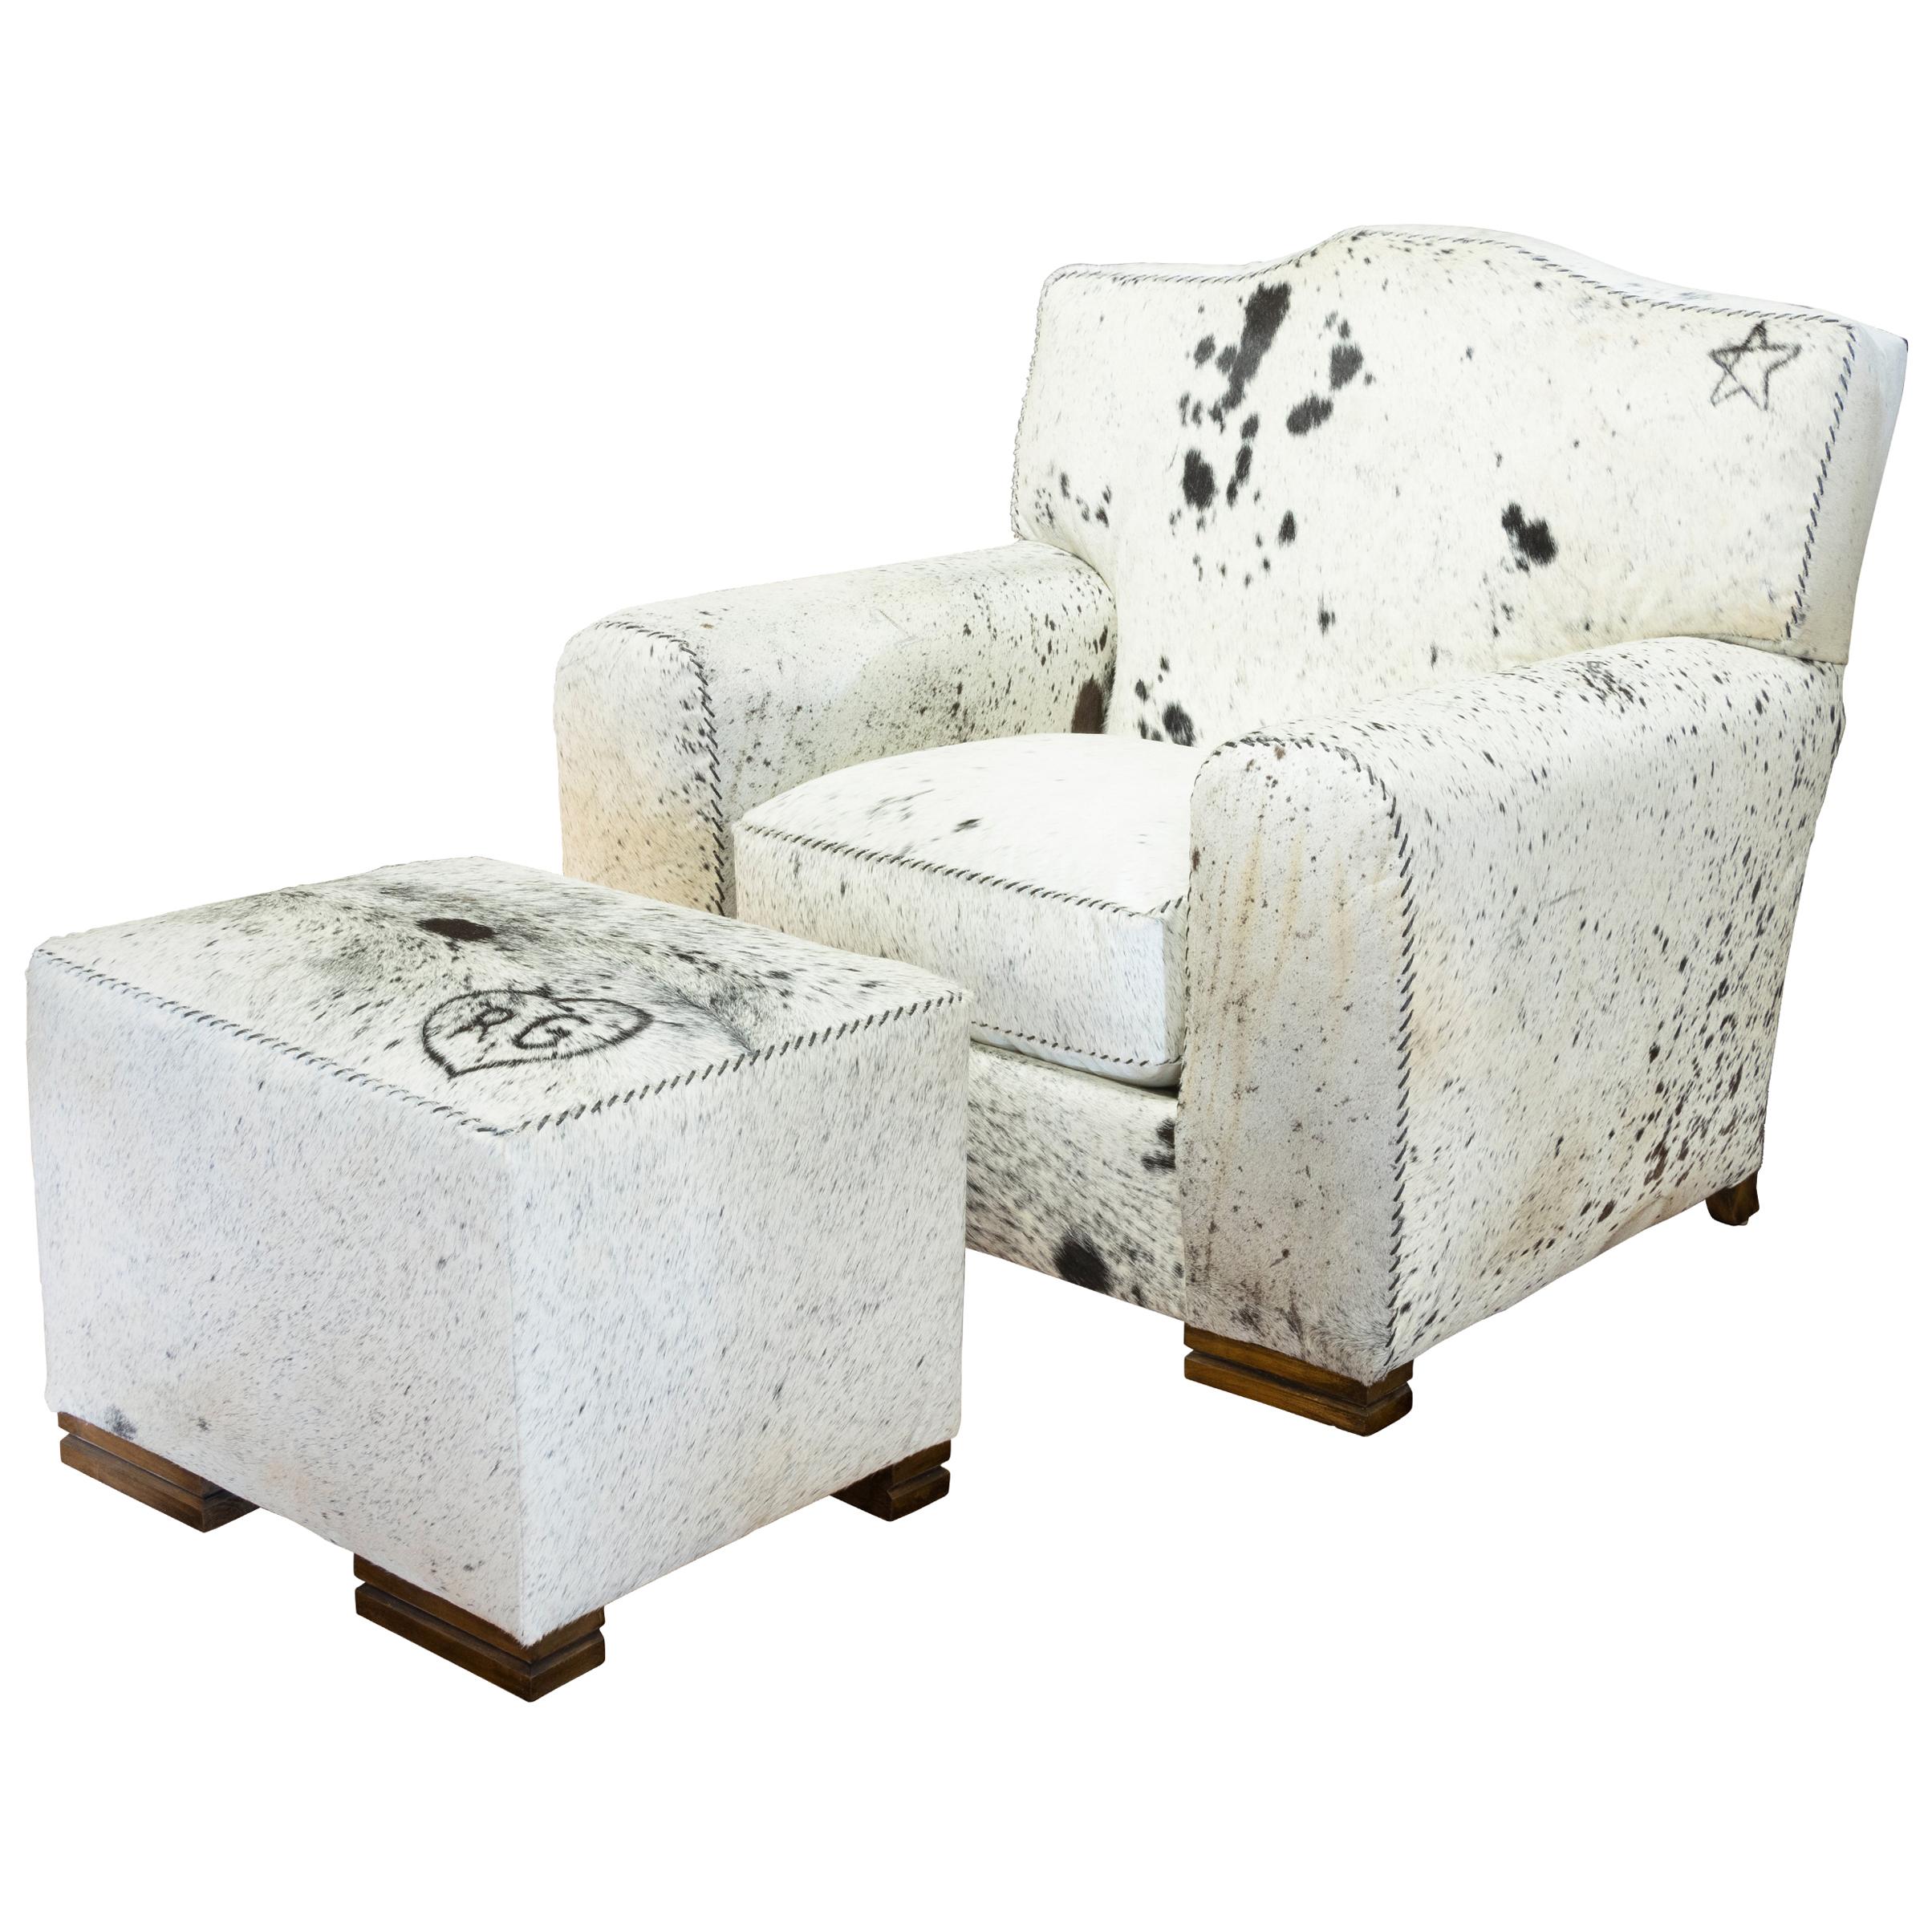 Longhorn Hide Chair and Ottoman